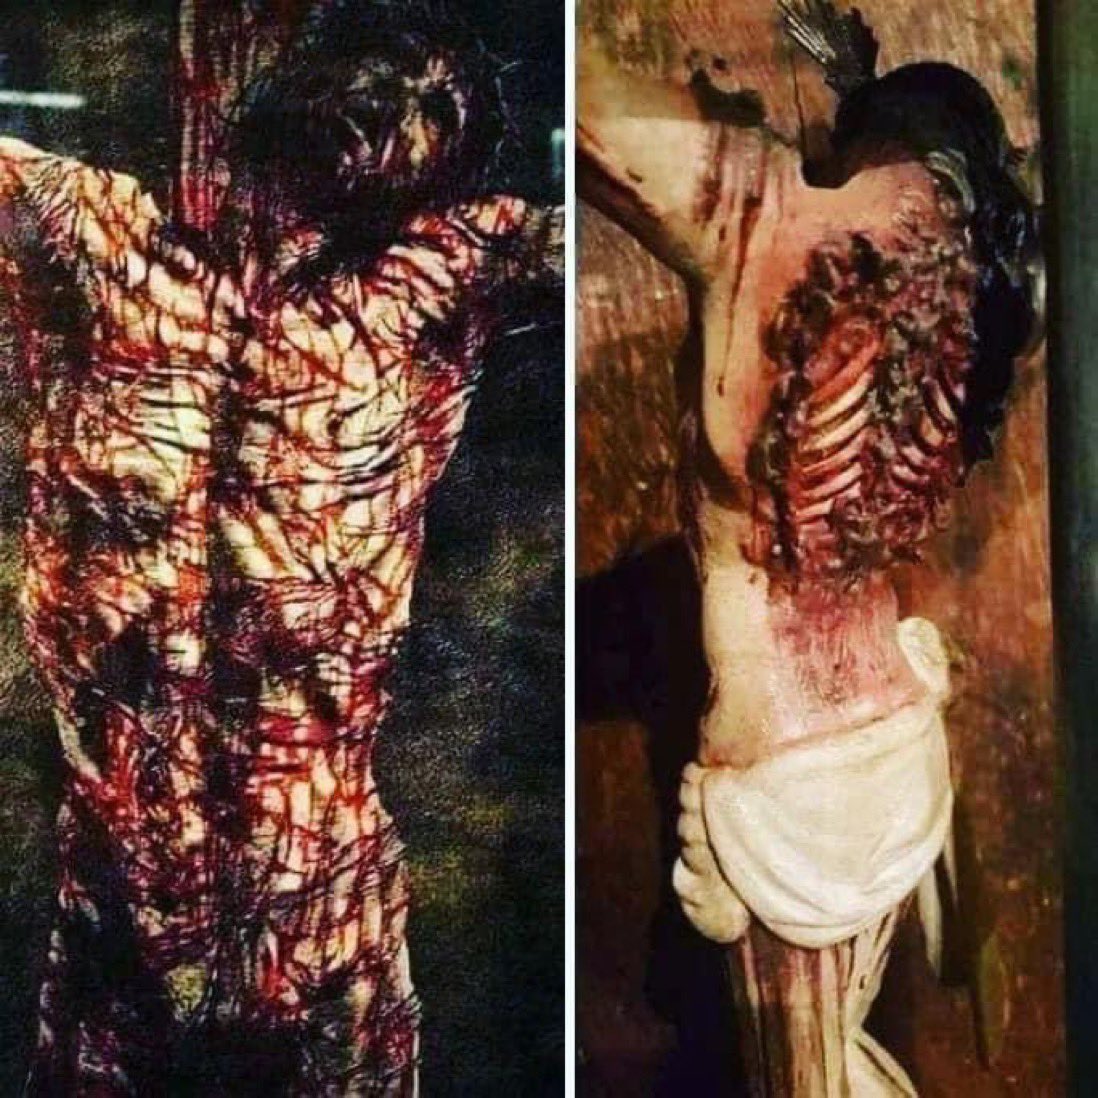 In 1986, The American Medical Association published an article titled 'The Physical Death of Jesus Christ'. It details the entire process of Jesus' trial to His death on the cross. In Luke 22, before Jesus is arrested, it is written that He was in great distress & sweating